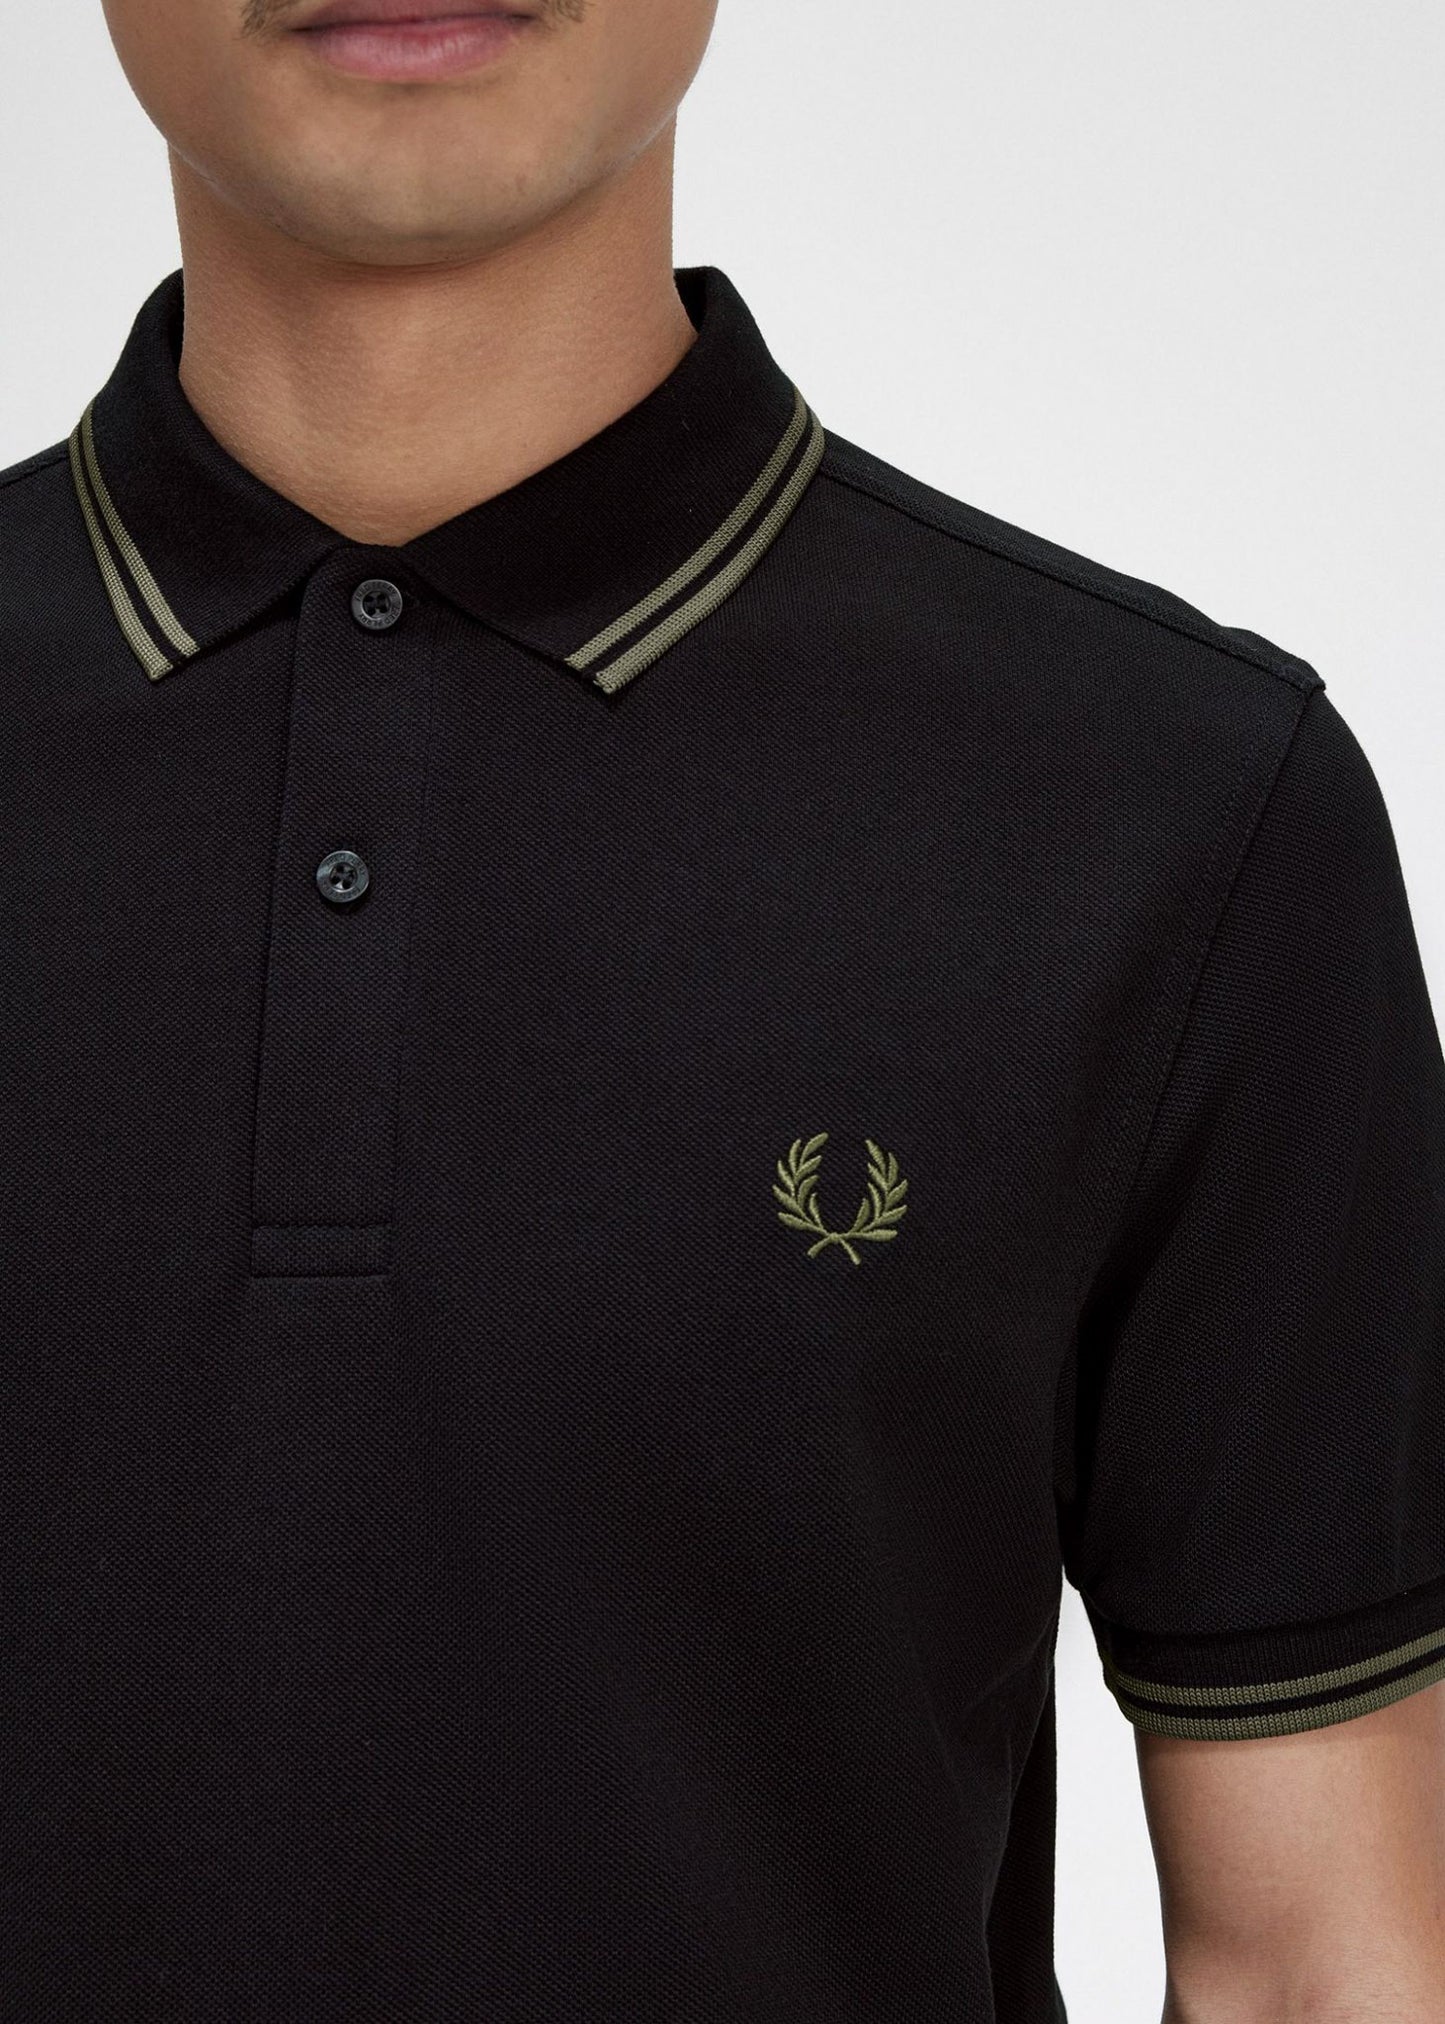 Twin tipped fred perry shirt - black field green